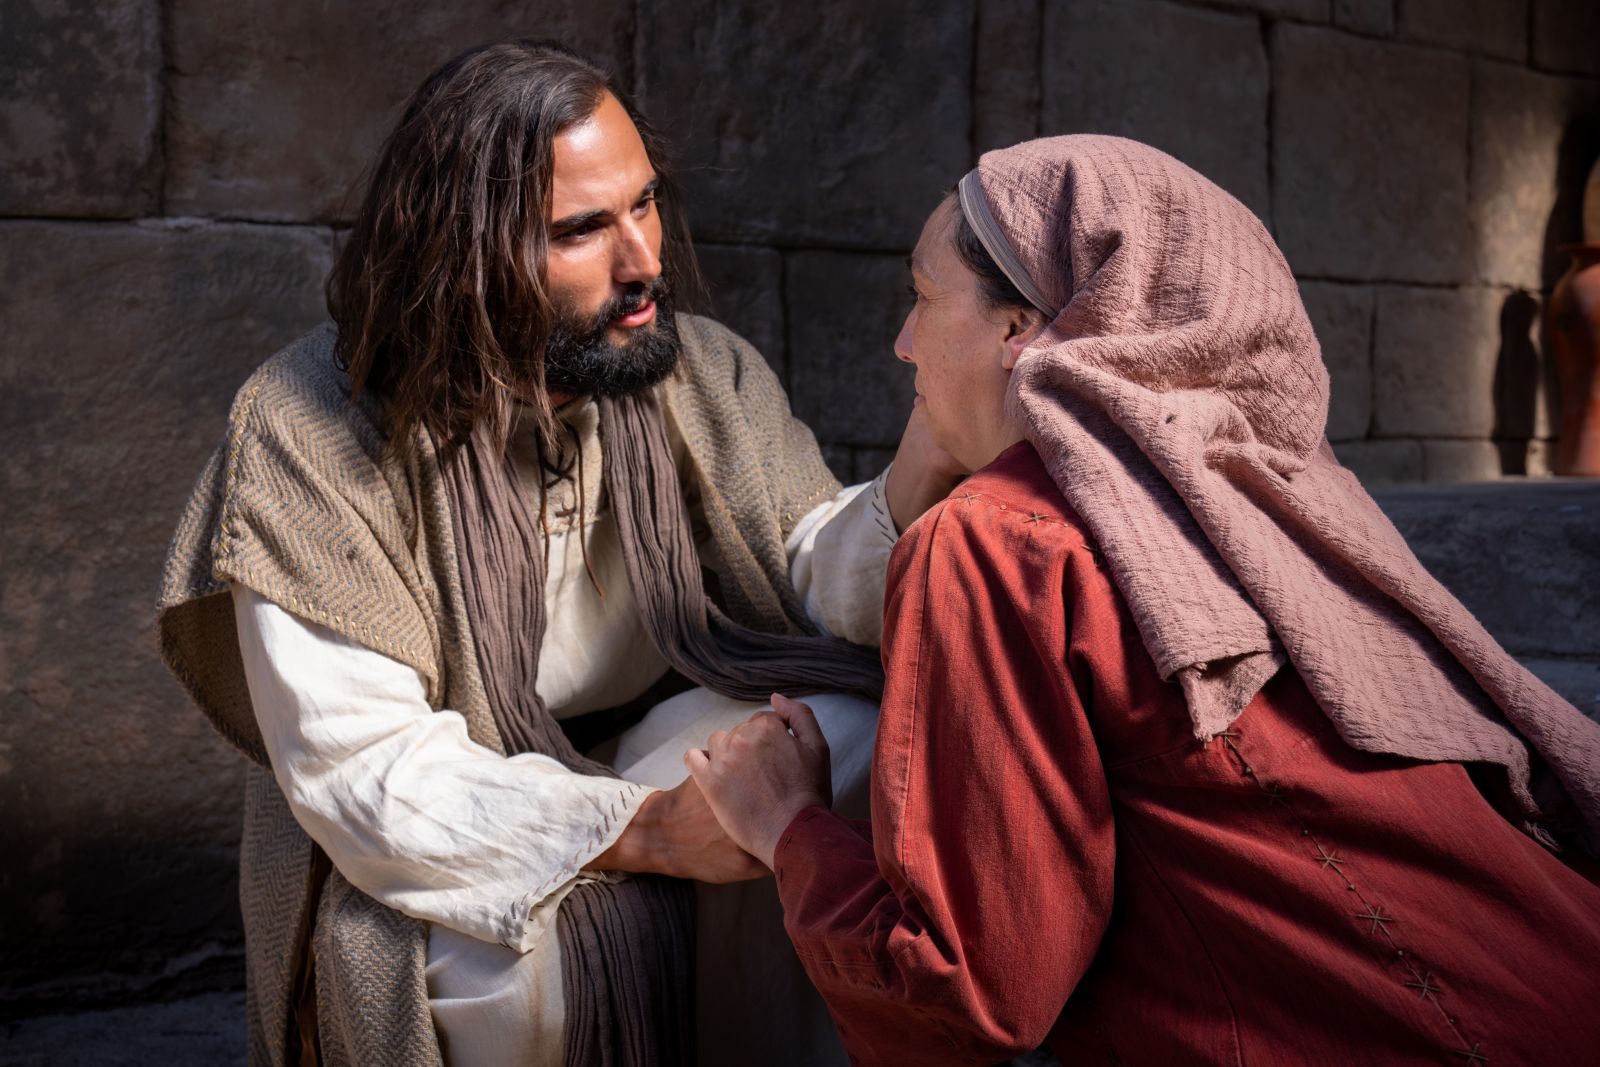 Jesus  reaches out to a woman.